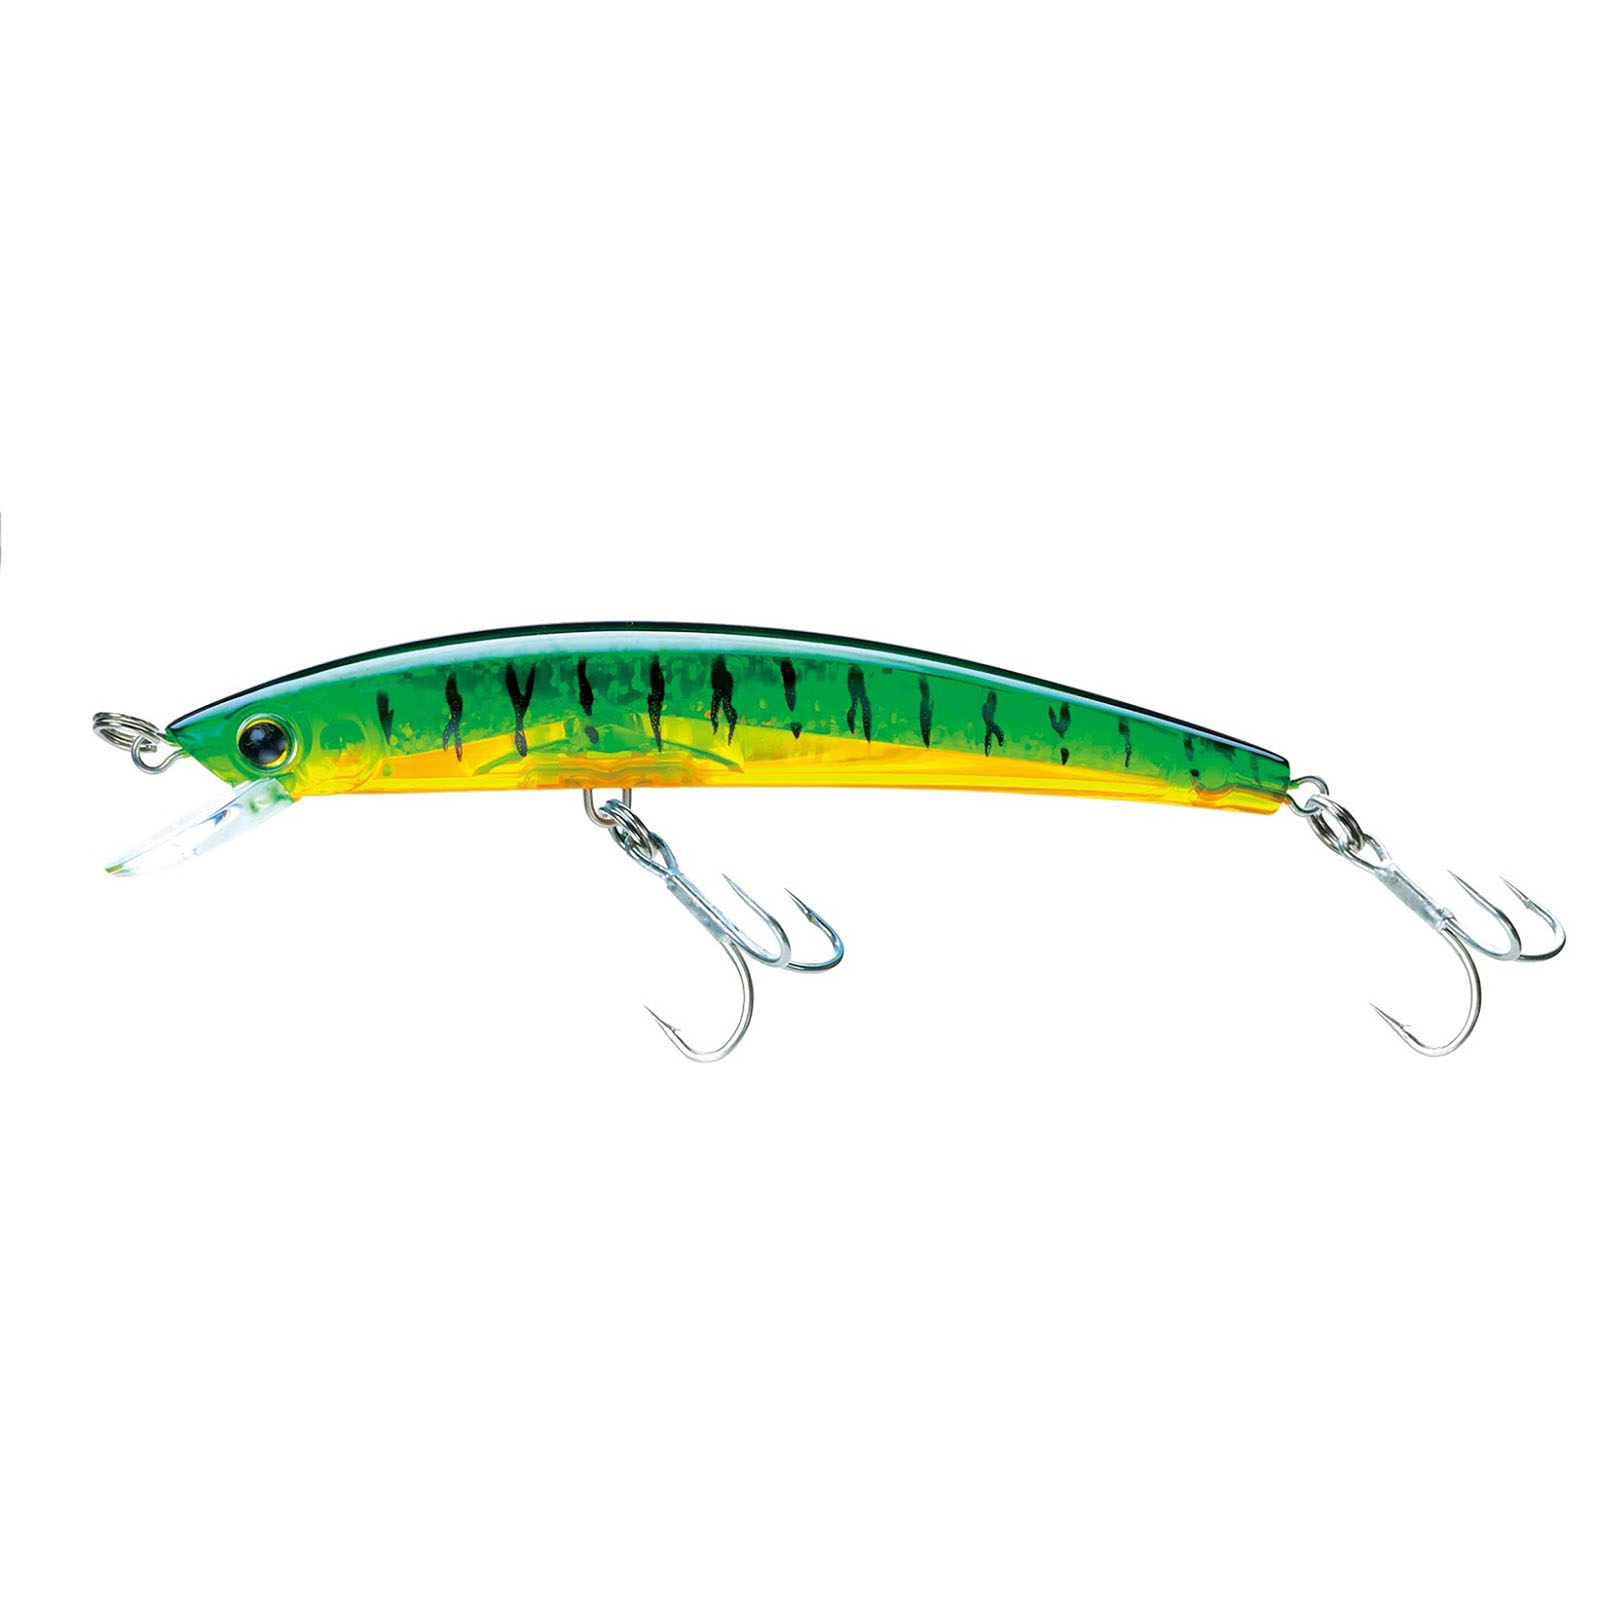 Buy Yo-Zuri Crystal Minnow Yozuri Crystal Minnow Sinking Lure, Gold Red,  2-3/4 Online at Low Prices in India 